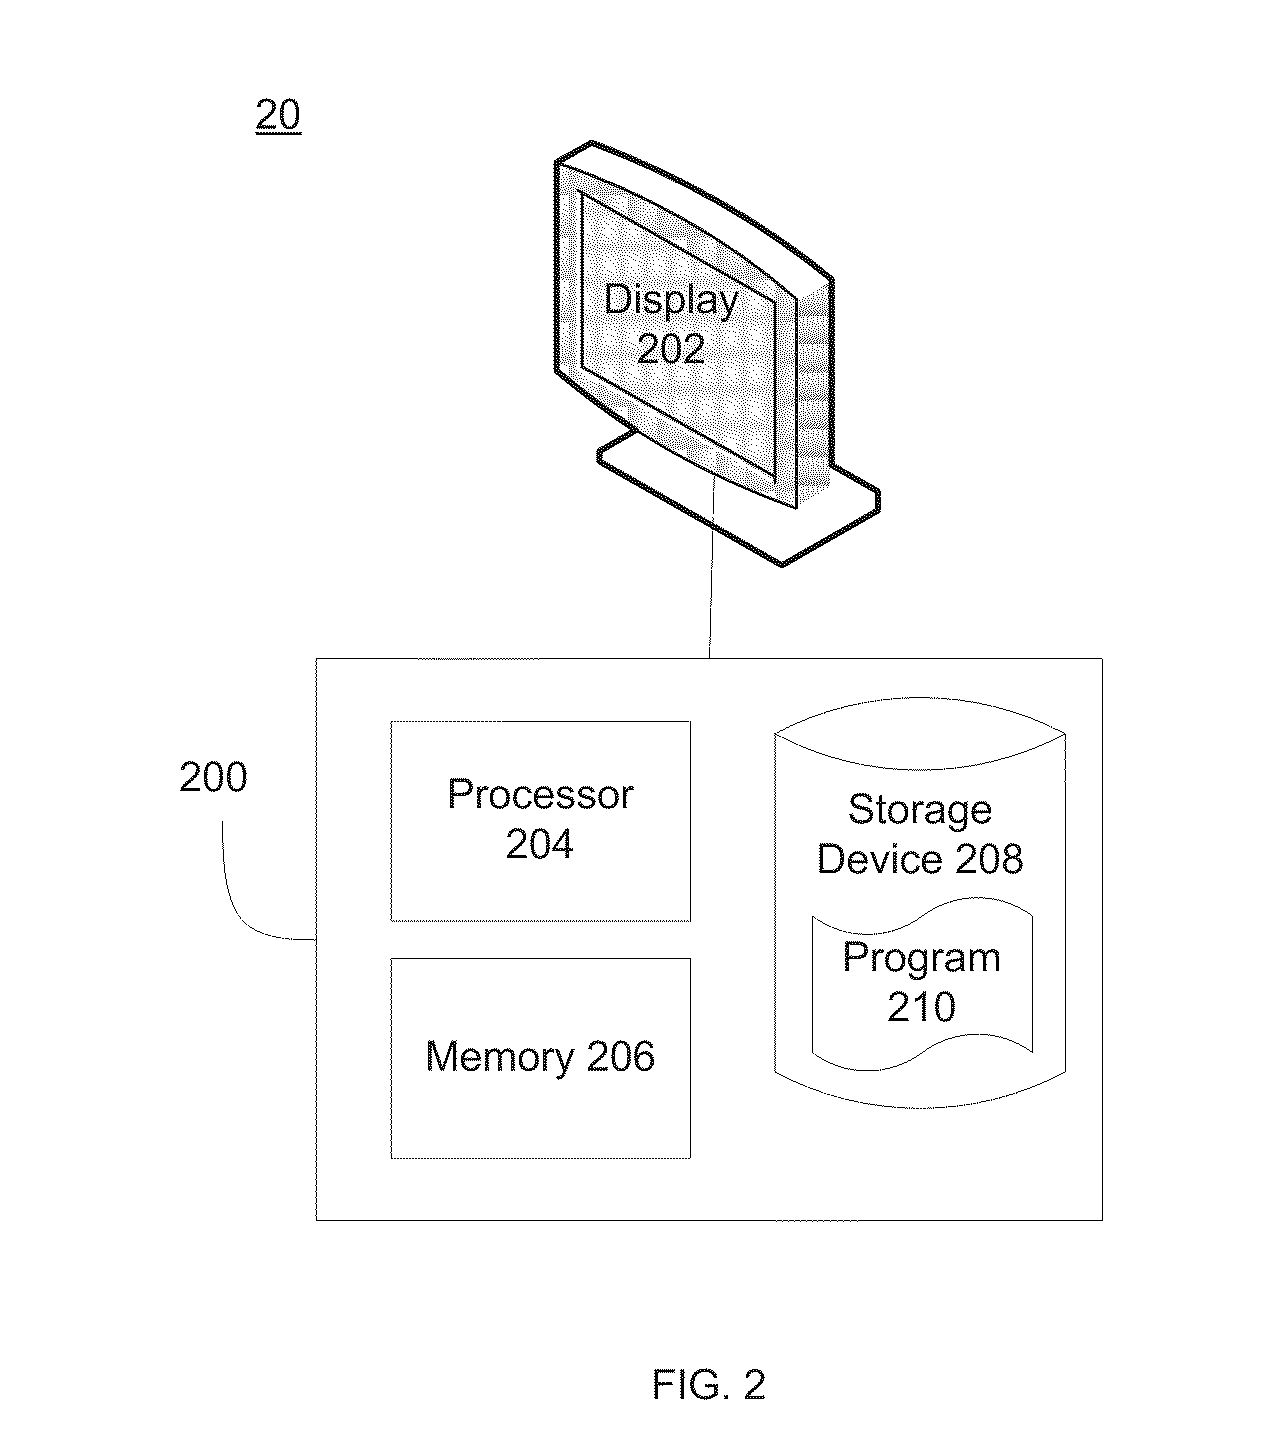 System and method for connecting network sockets between applications